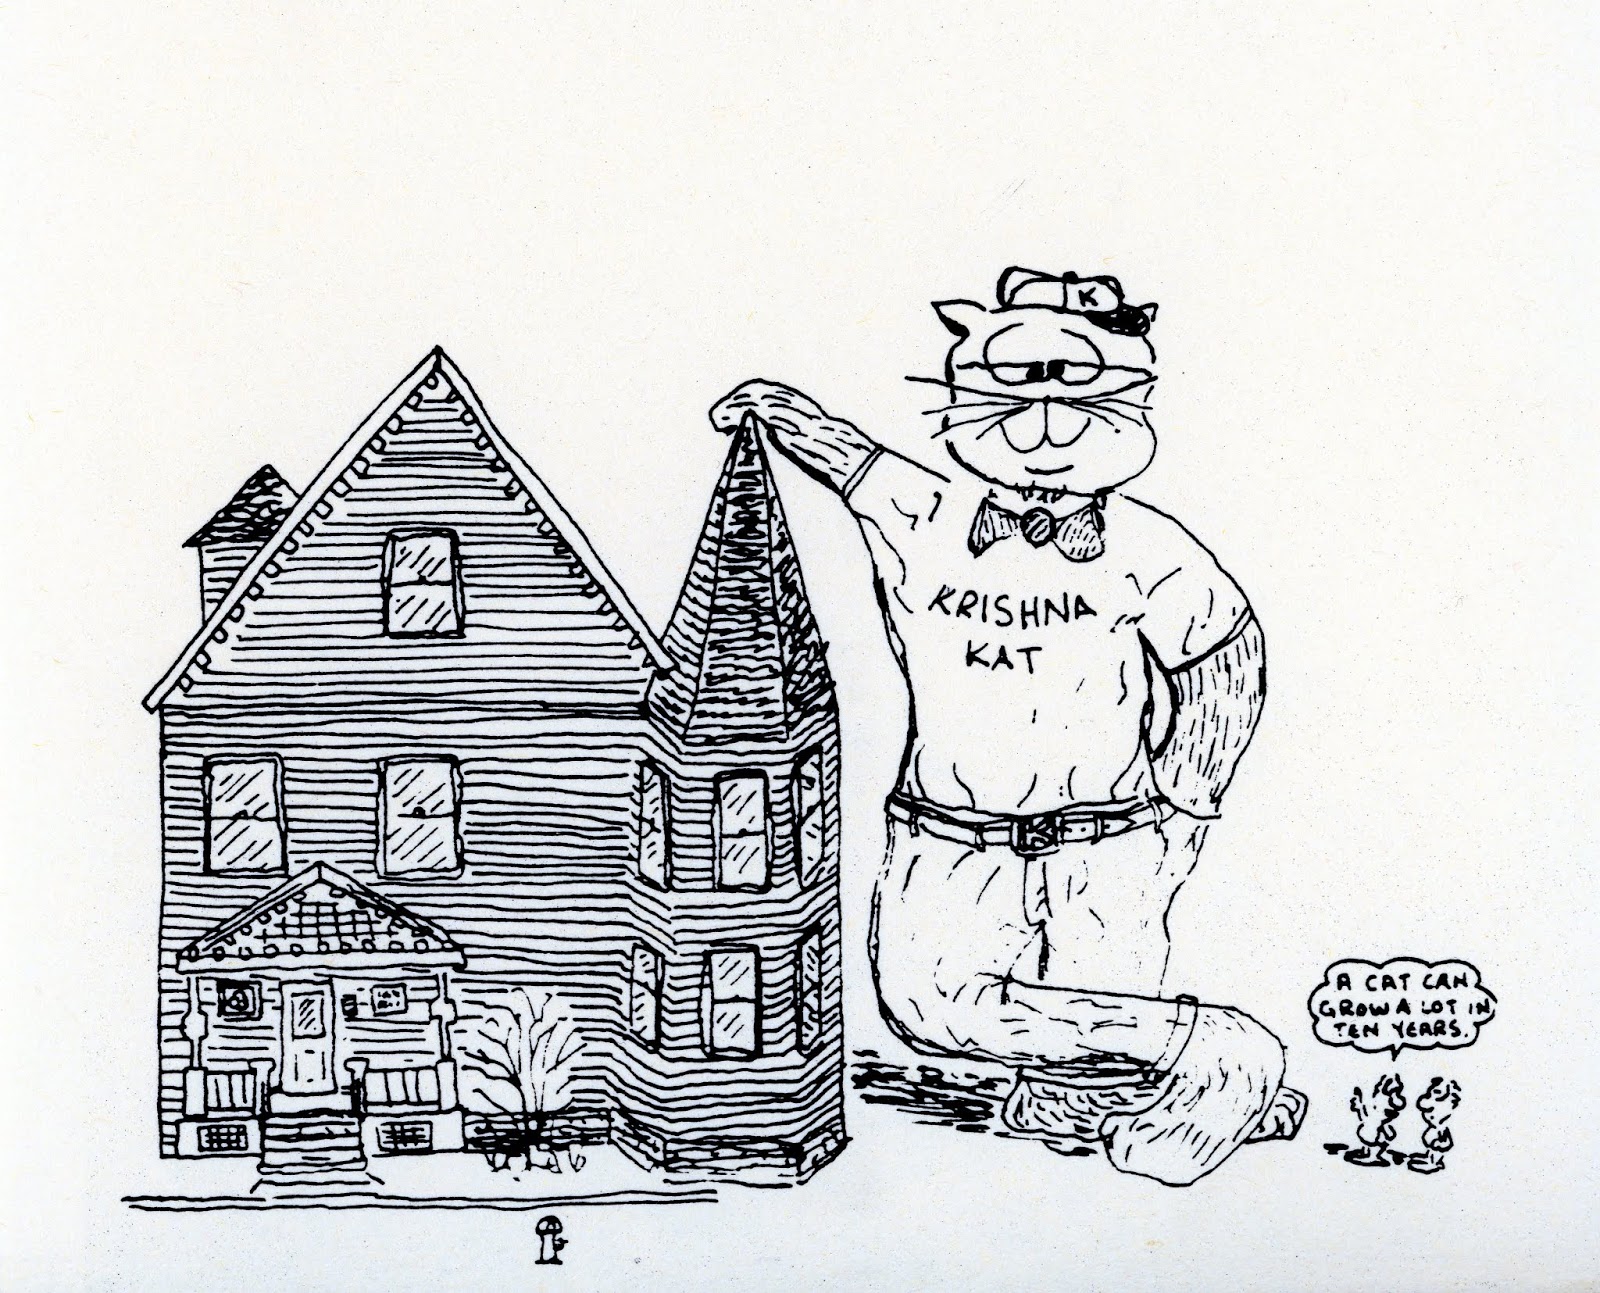 cartoon of "Krishna Kat" standing next to Havurat Shalom house.  The cat is taller than the house. Two tiny people in the corner say "A cat can grow a lot in 10 years"